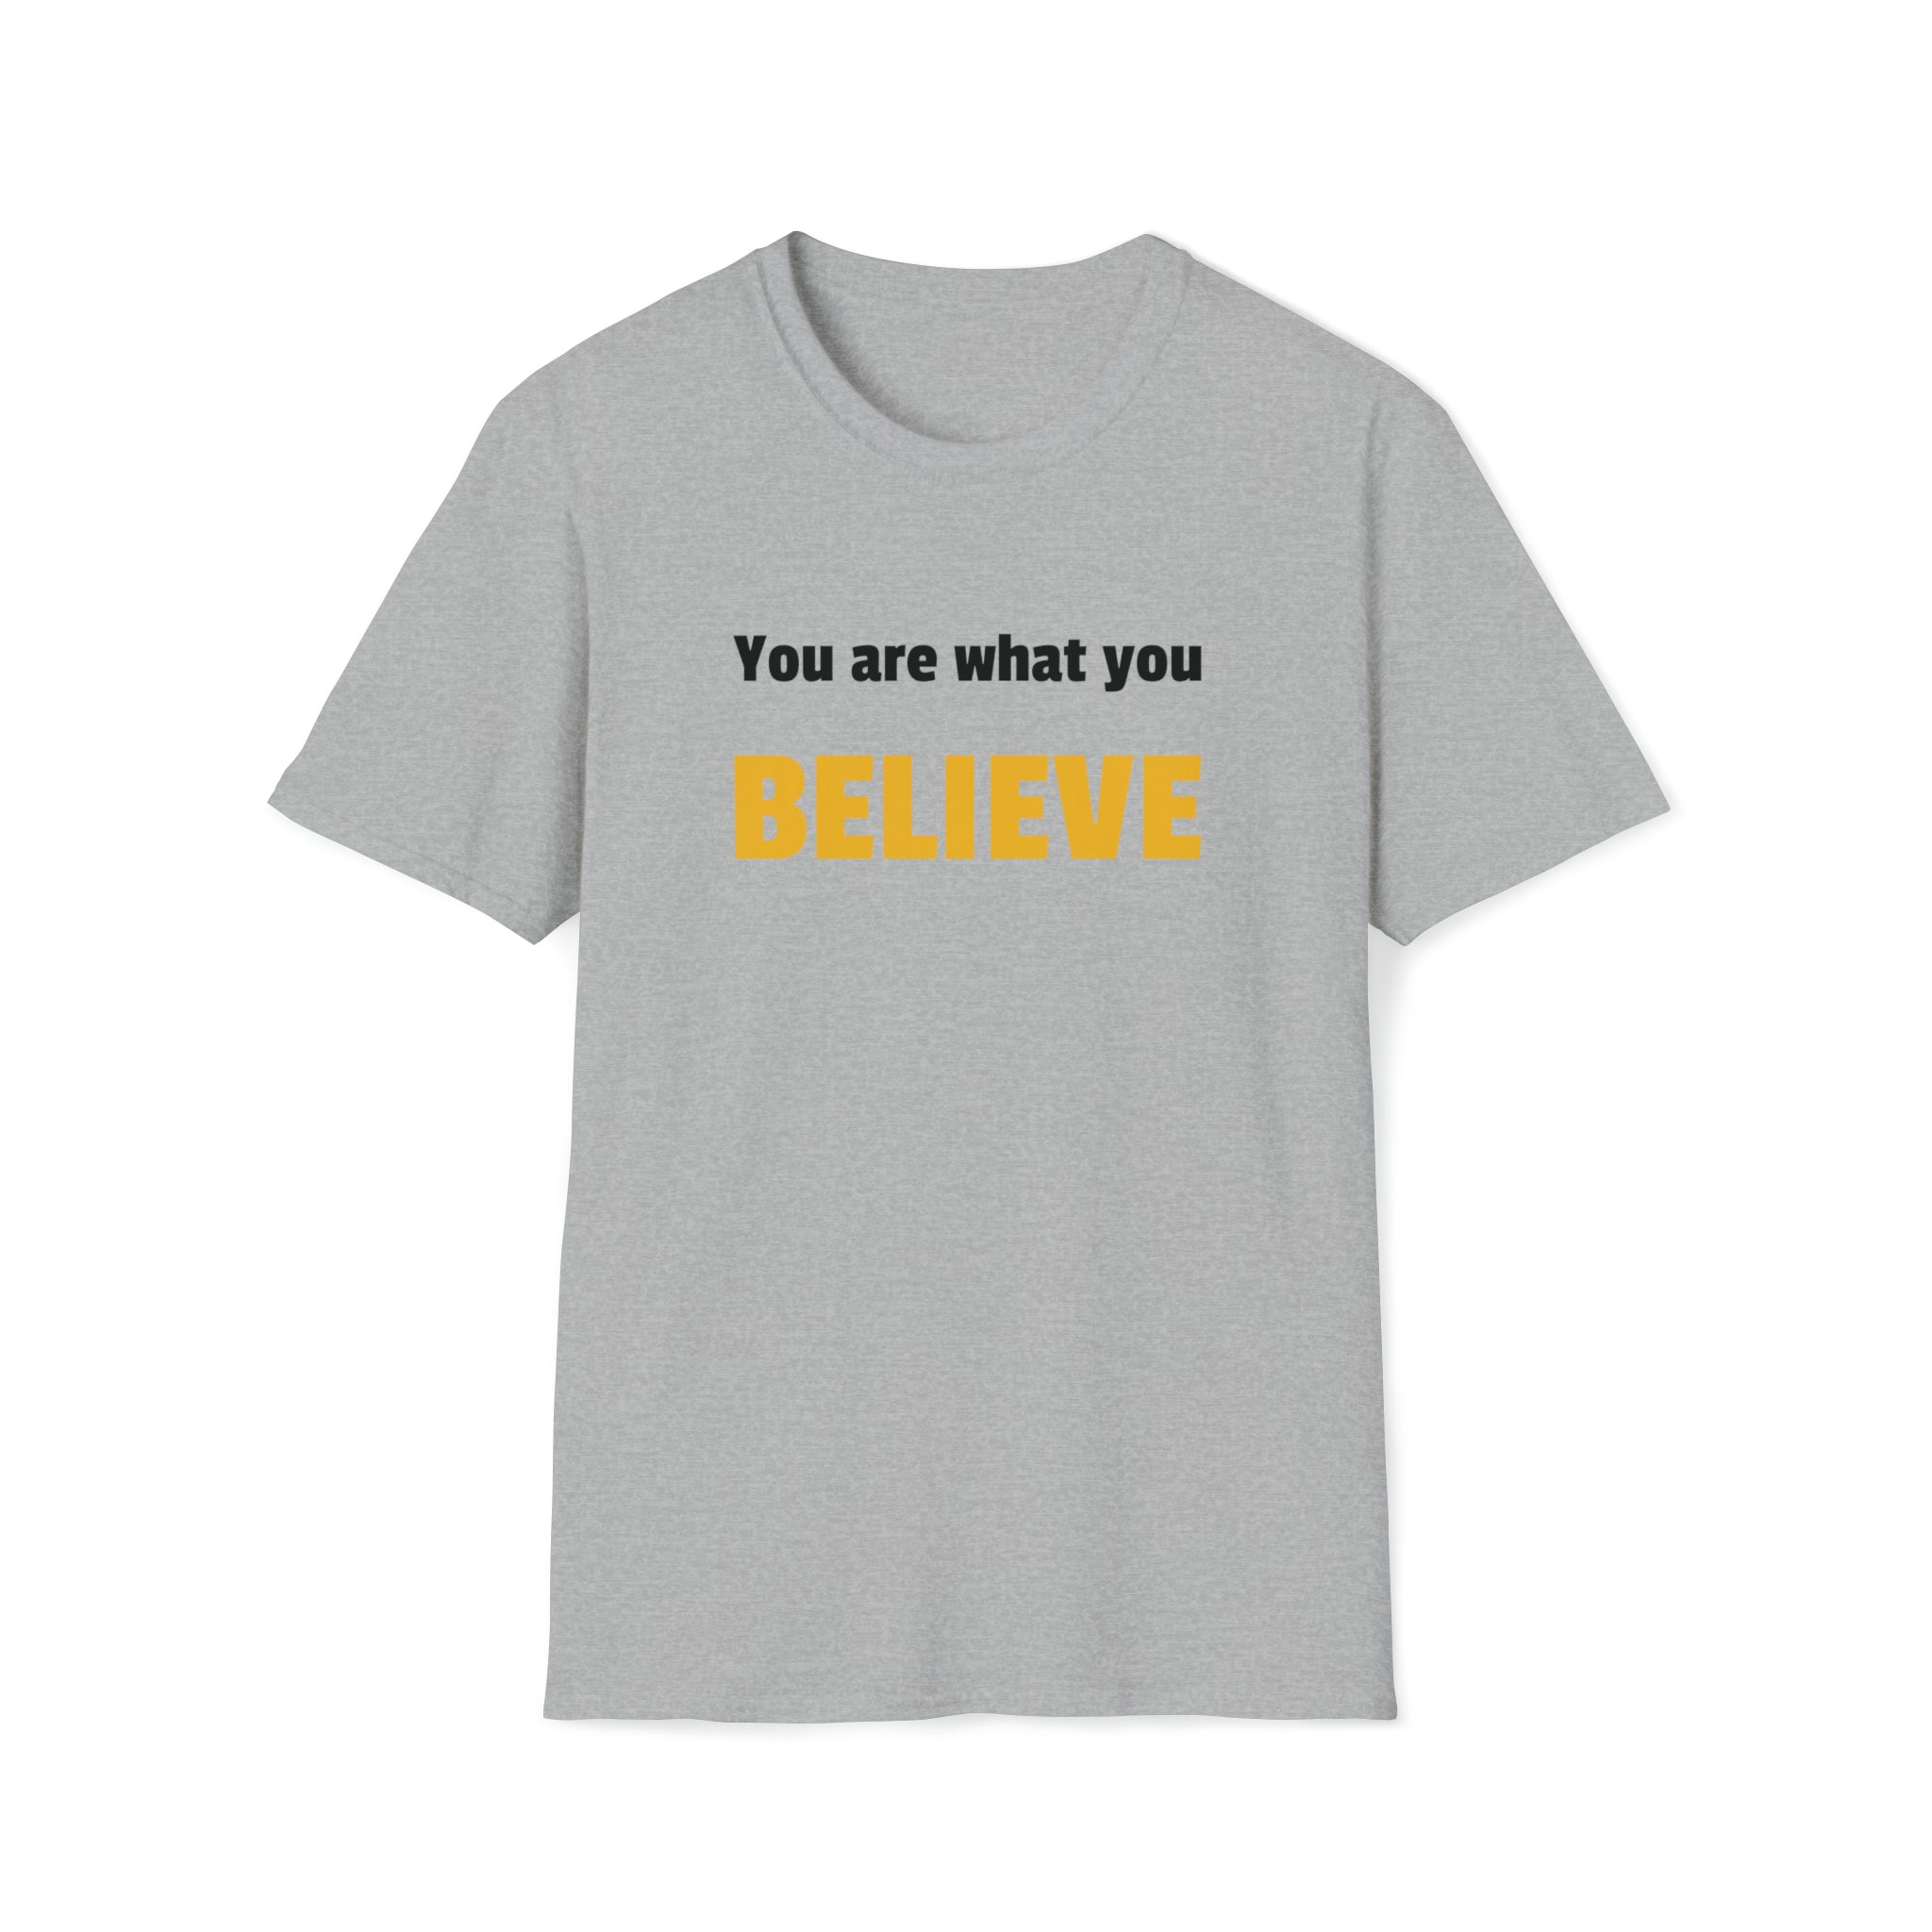 You are what you believe T-Shirt